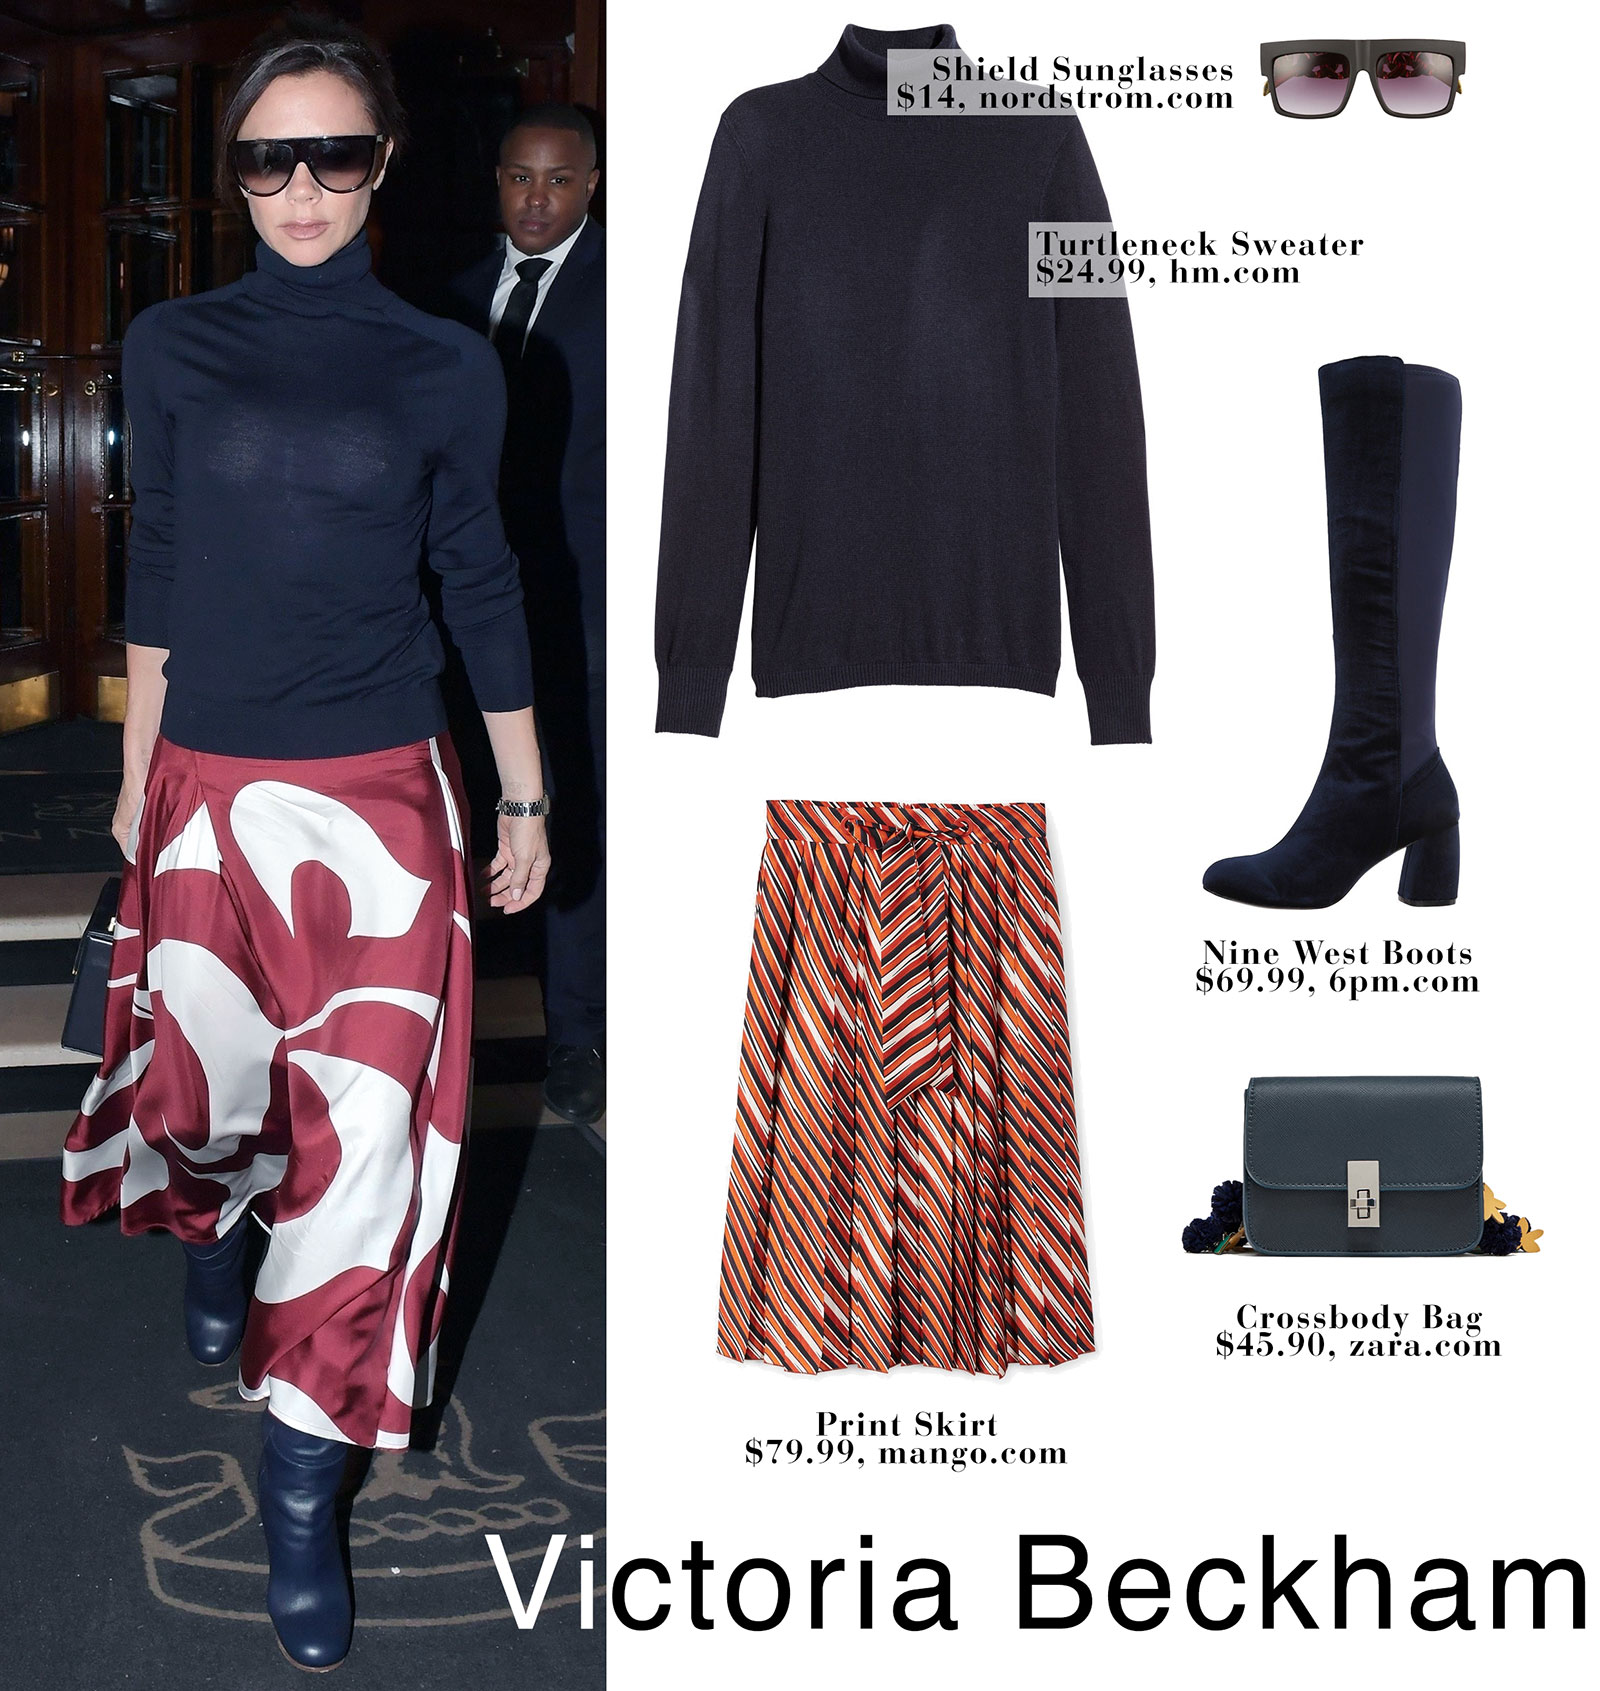 Victoria Beckham's print midi skirt and navy turtleneck look for less